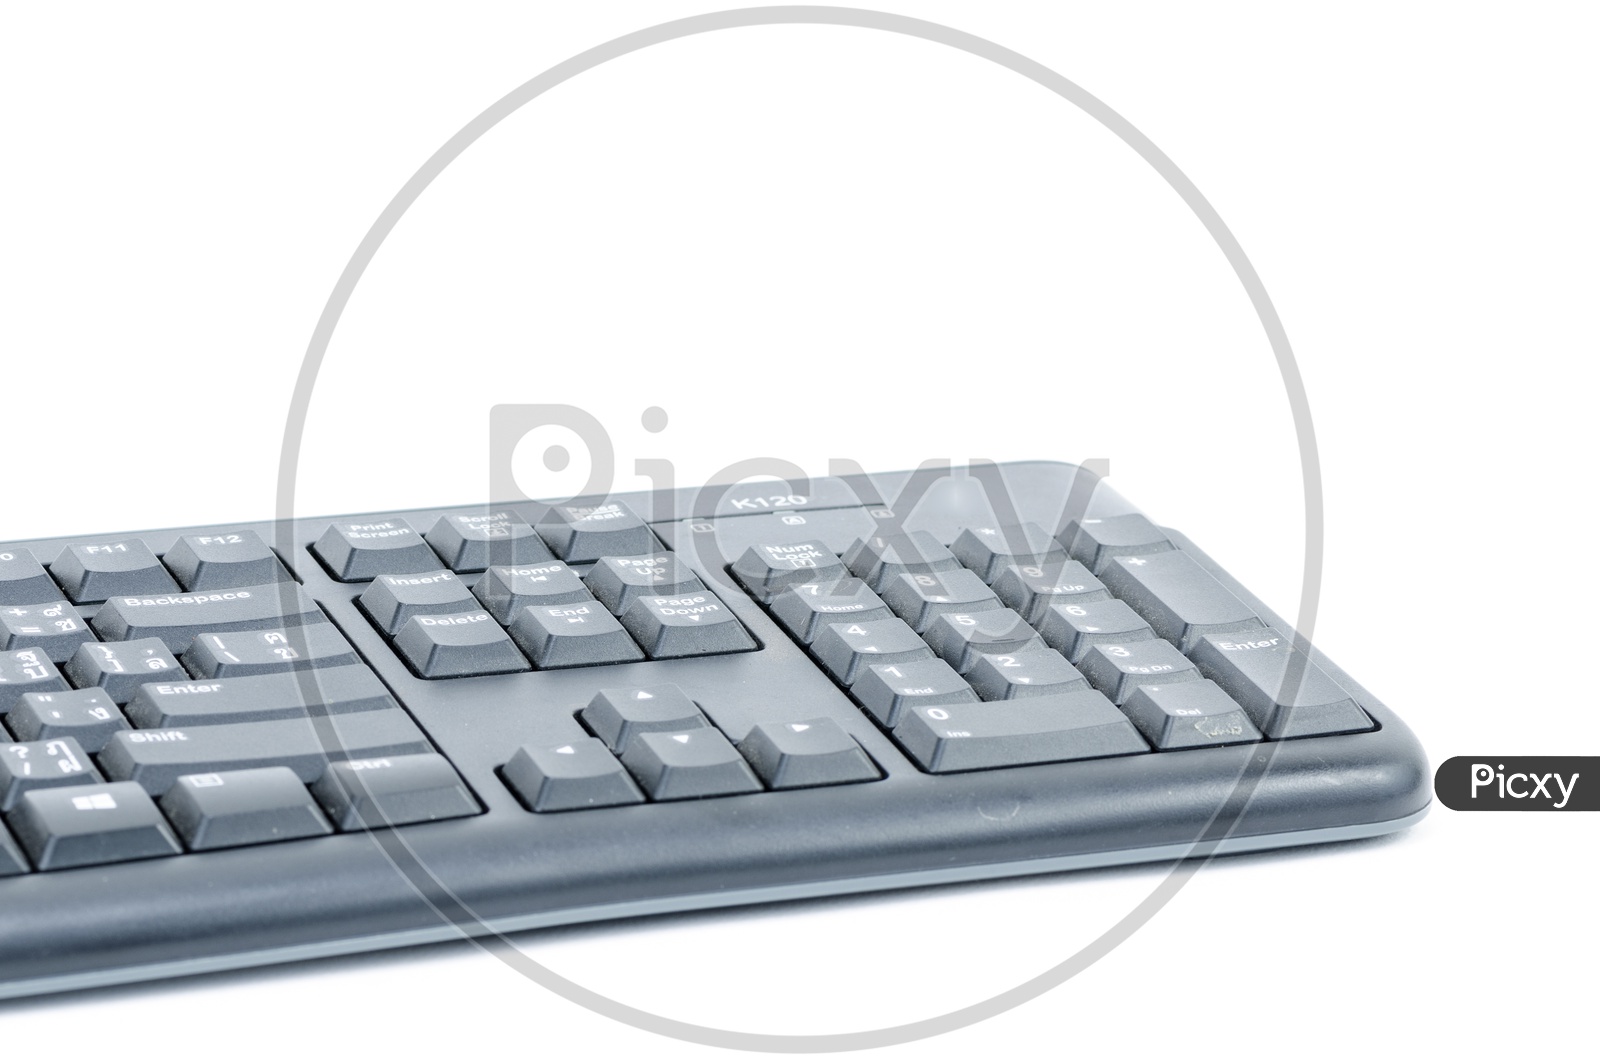 Keyboard Over an isolated White Background